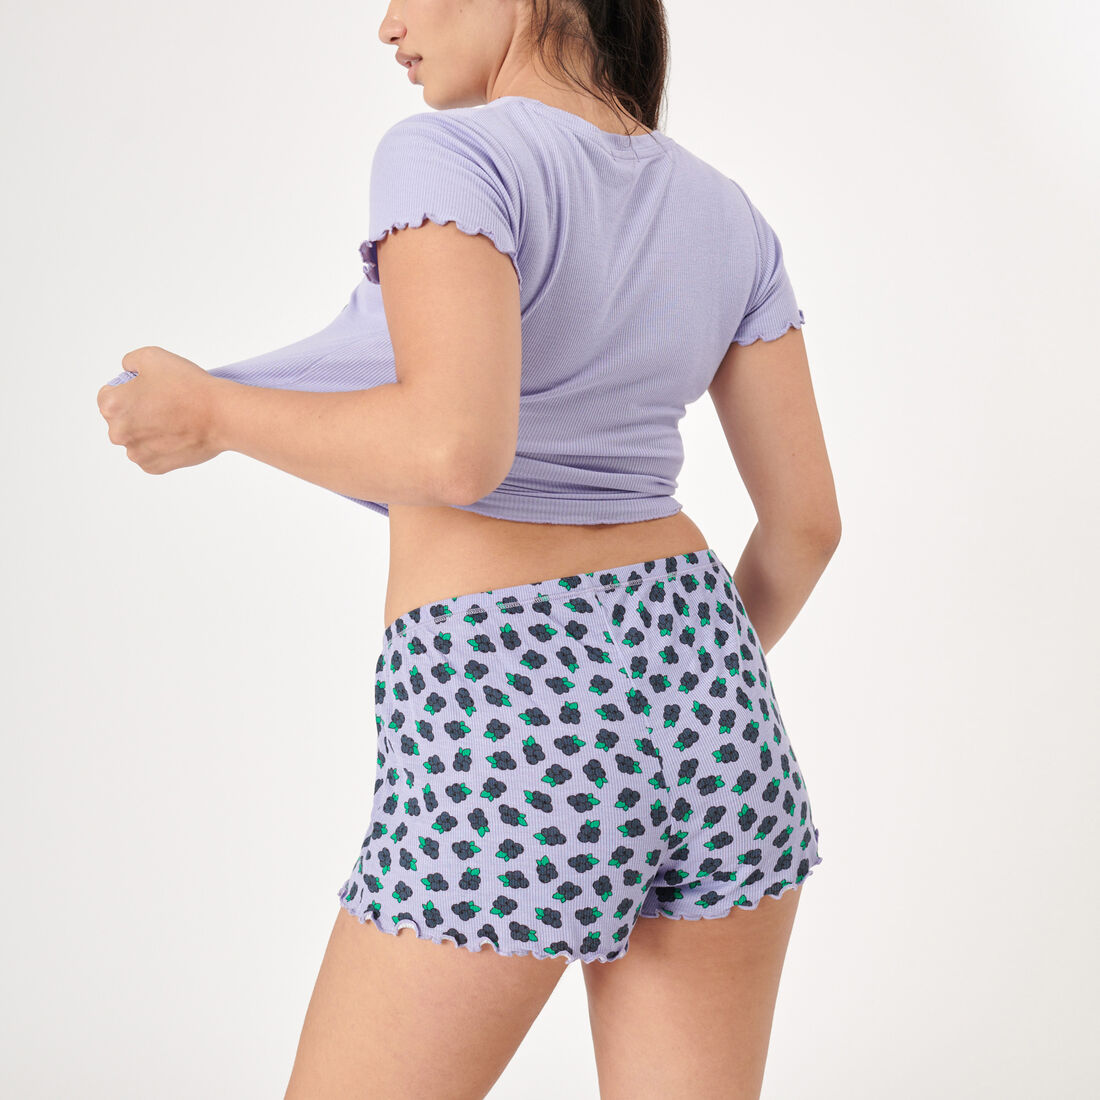 blueberry patterned top;